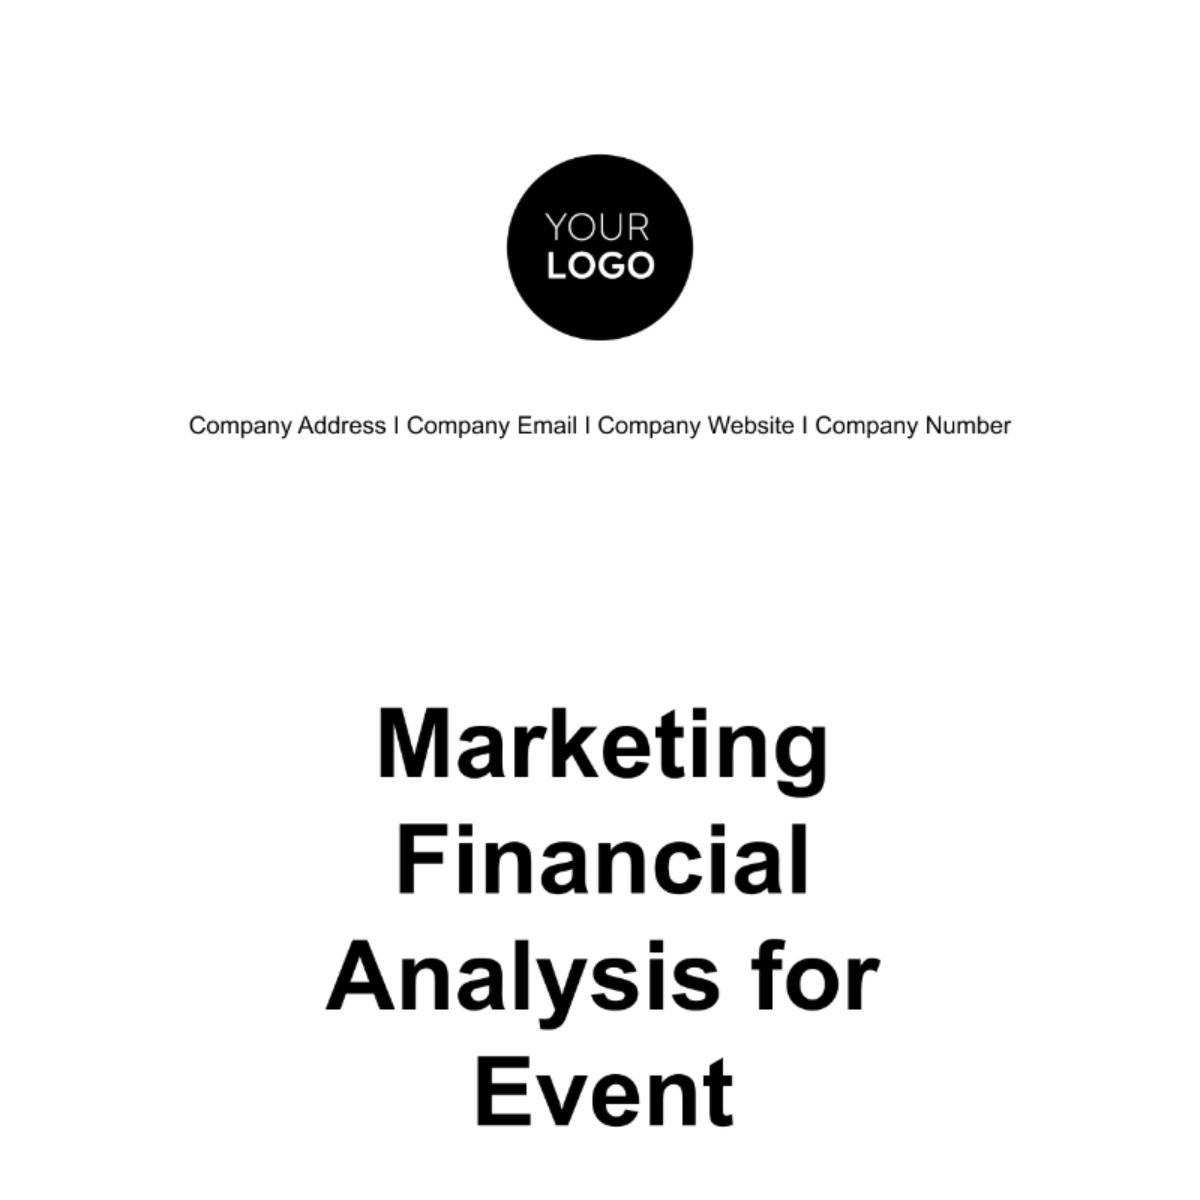 Marketing Financial Analysis for Event Template